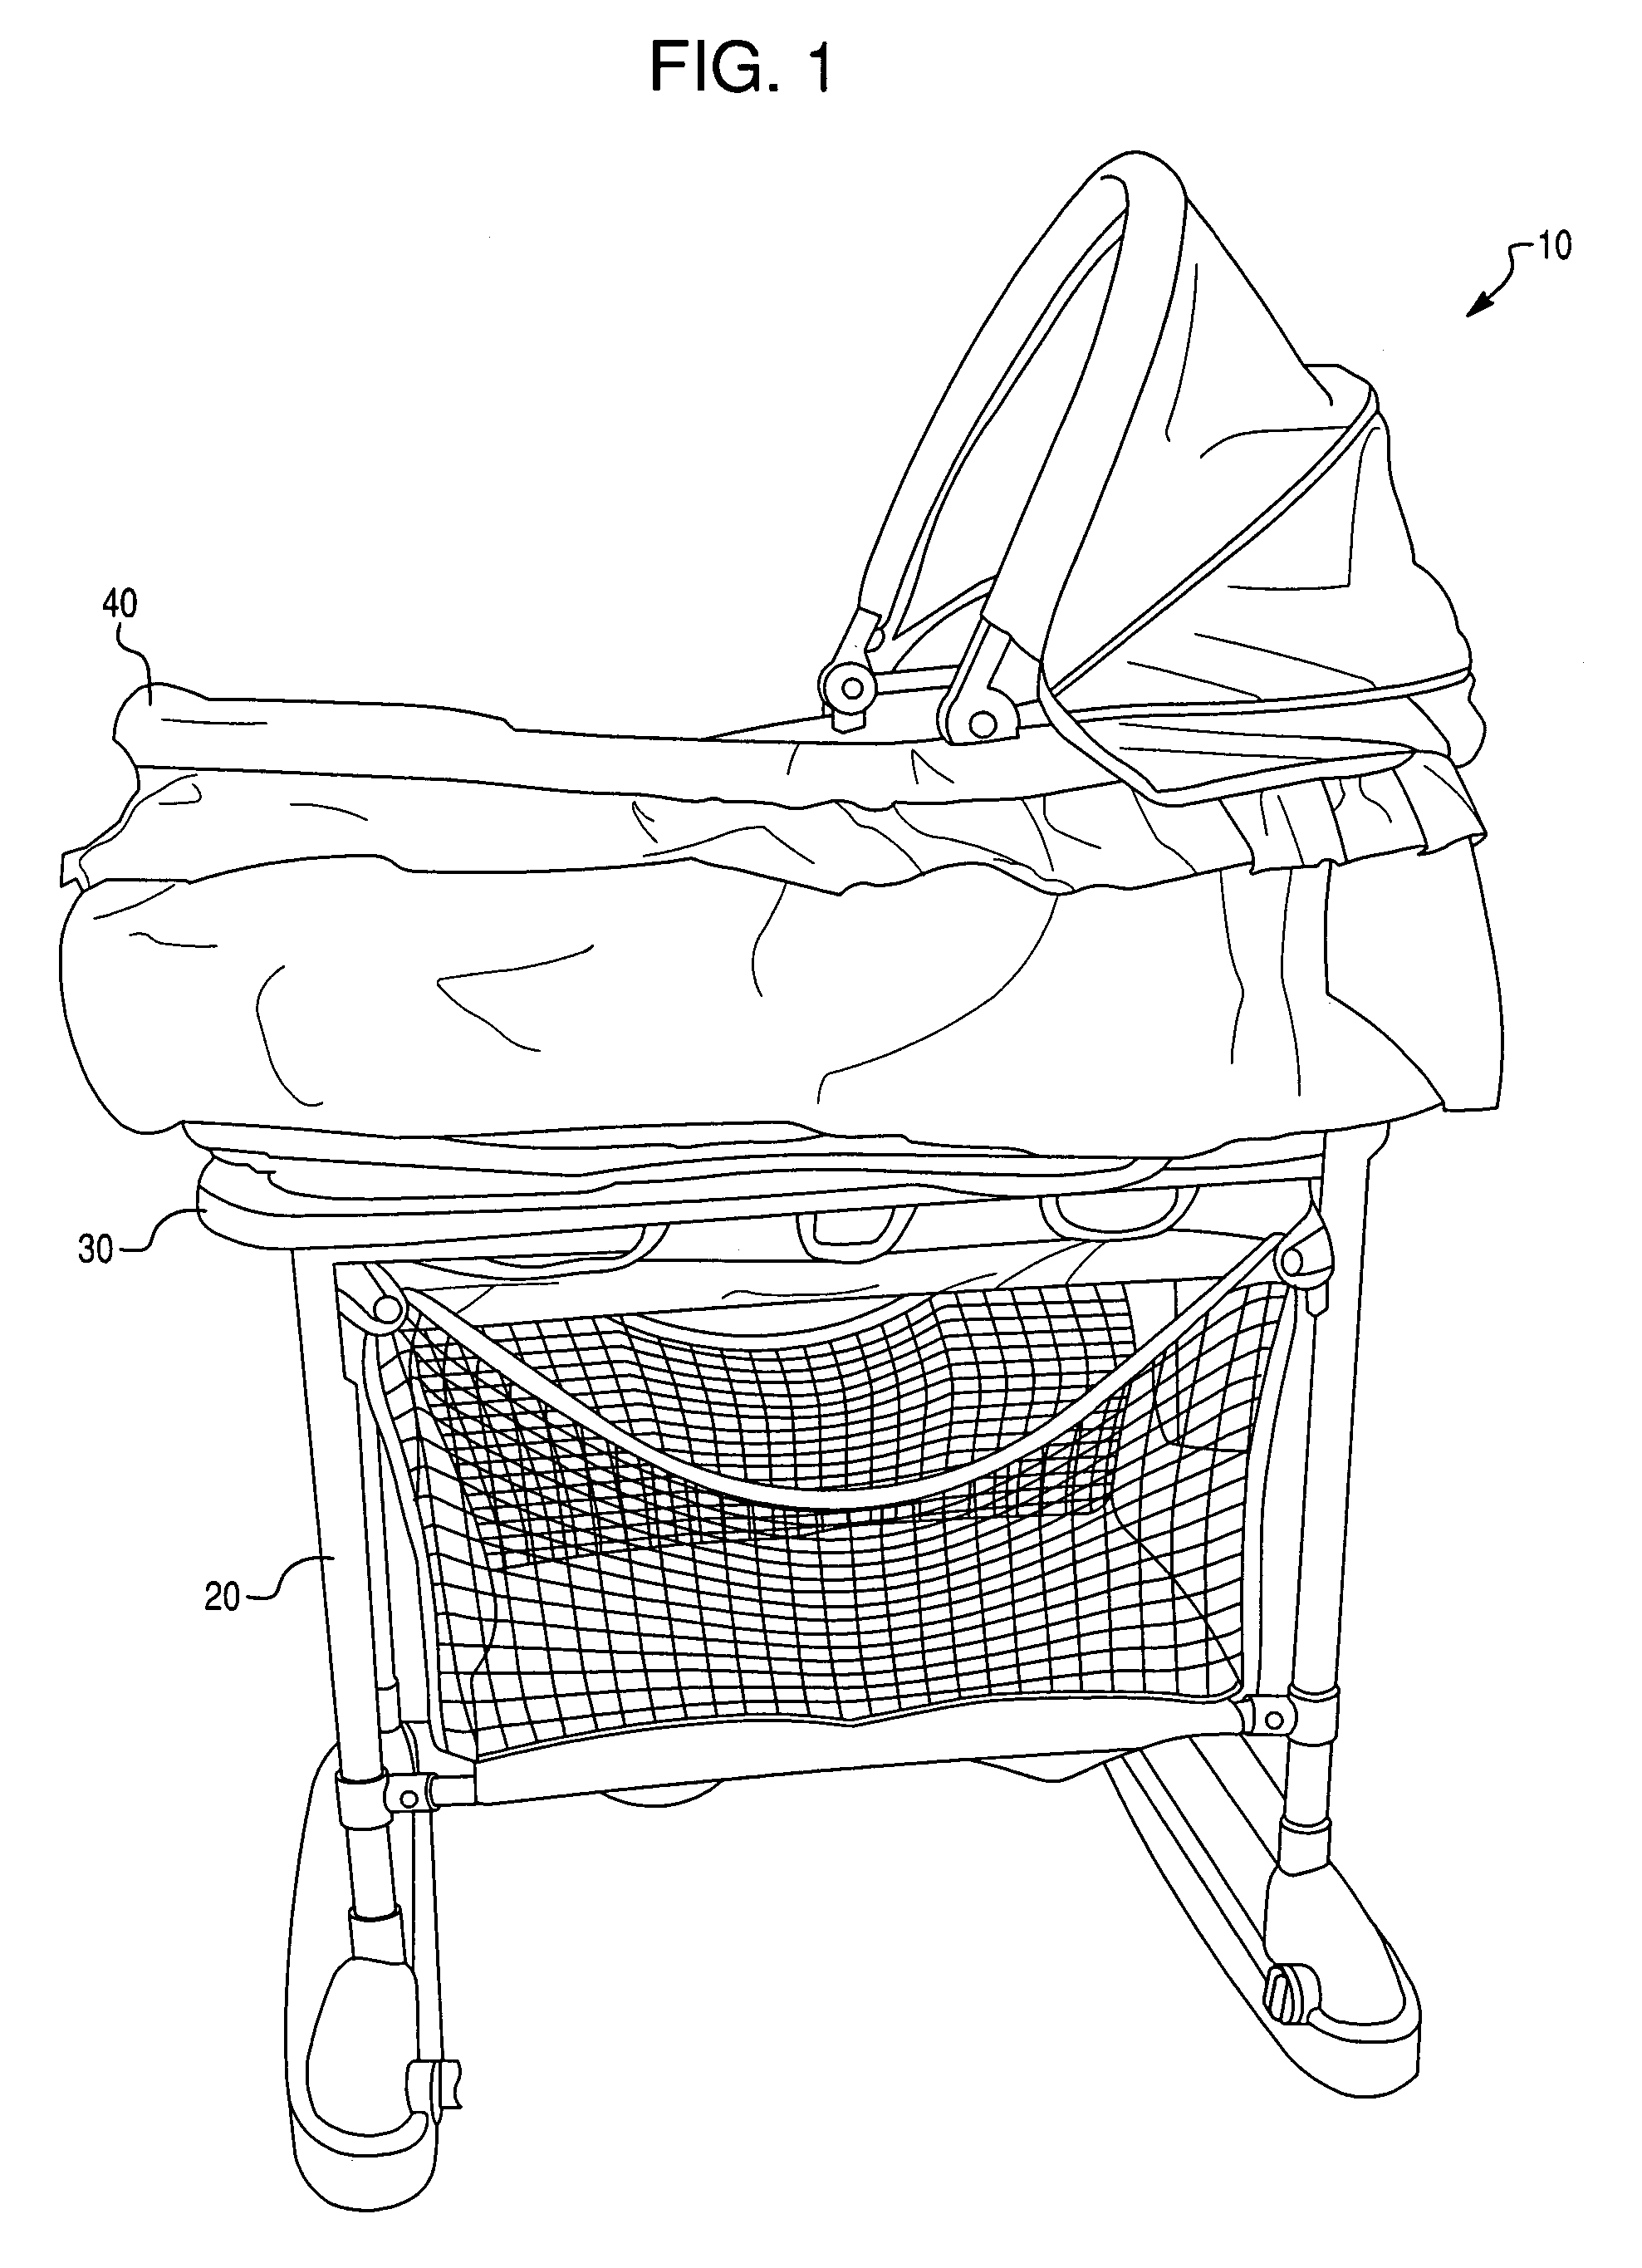 Bassinet and changing table assembly